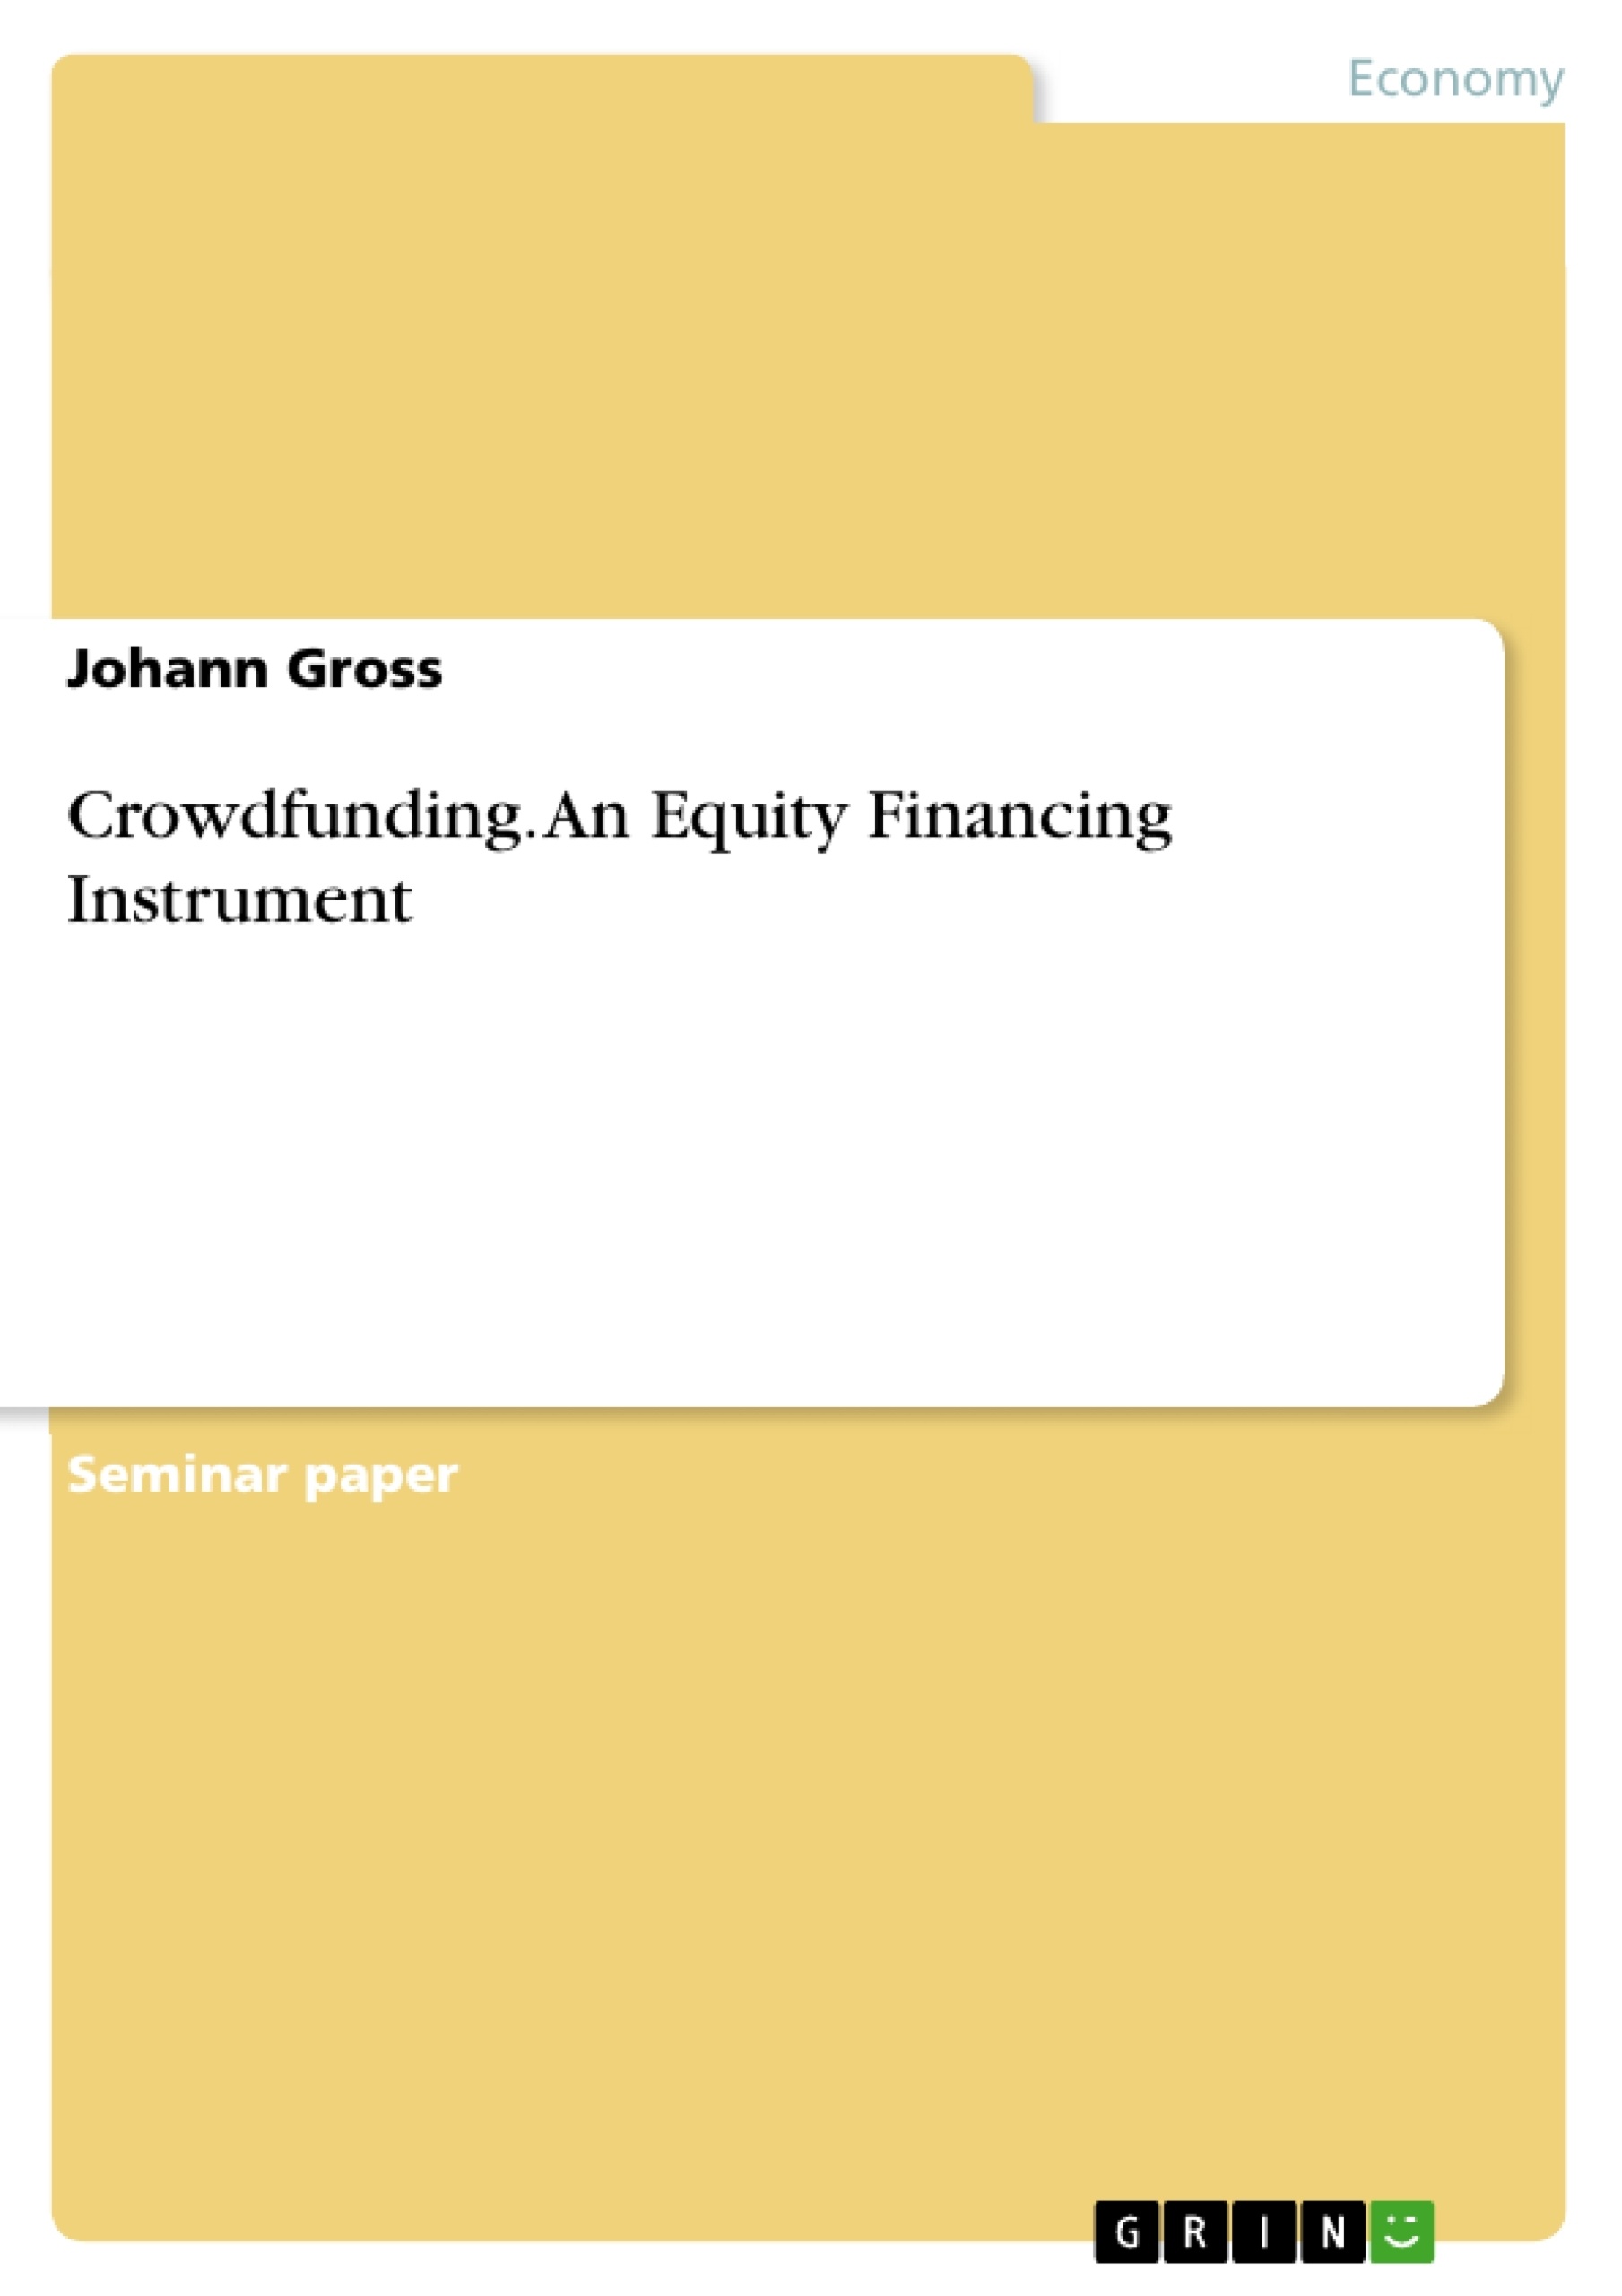 Title: Crowdfunding. An Equity Financing Instrument